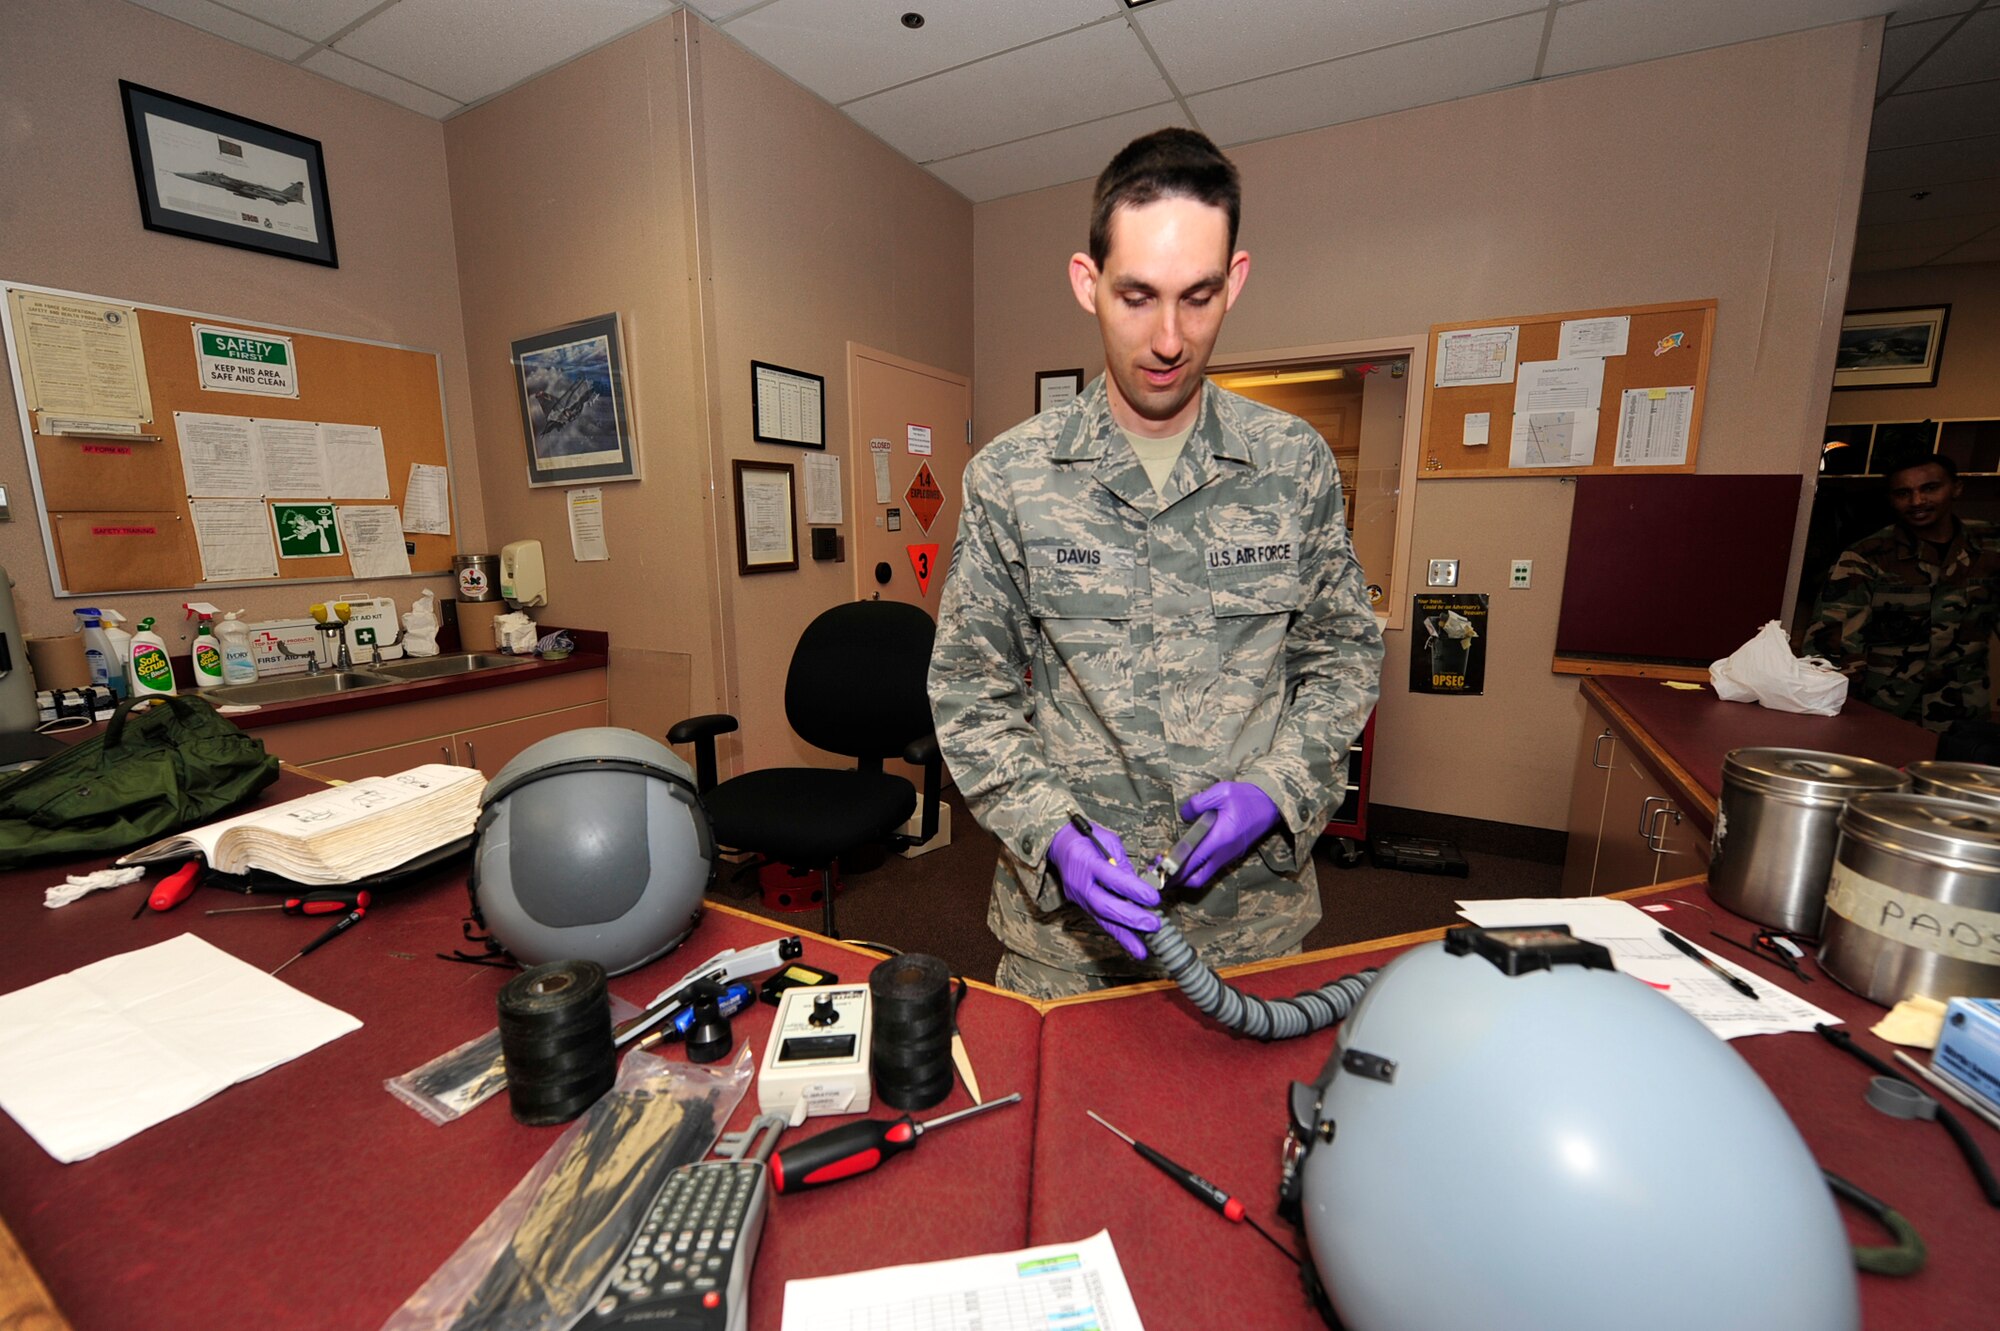 United States Air Force Staff Sgt. Nathan Davis, an aircrew flight equipment technician with the 18th Operations Support Squadron, Kadena Air Force Base, Japan, conducts a periodic inspection on an HGU-55P helmet during the Northern Edge Premier Joint Training Exercise, at Eielson Air Force Base, Alaska, June 21. Northern Edge 2011, allows military members to hone existing skills and test future productions of weapon potentials. (U.S. Air Force photo/Staff Sgt. Lakisha A. Croley)